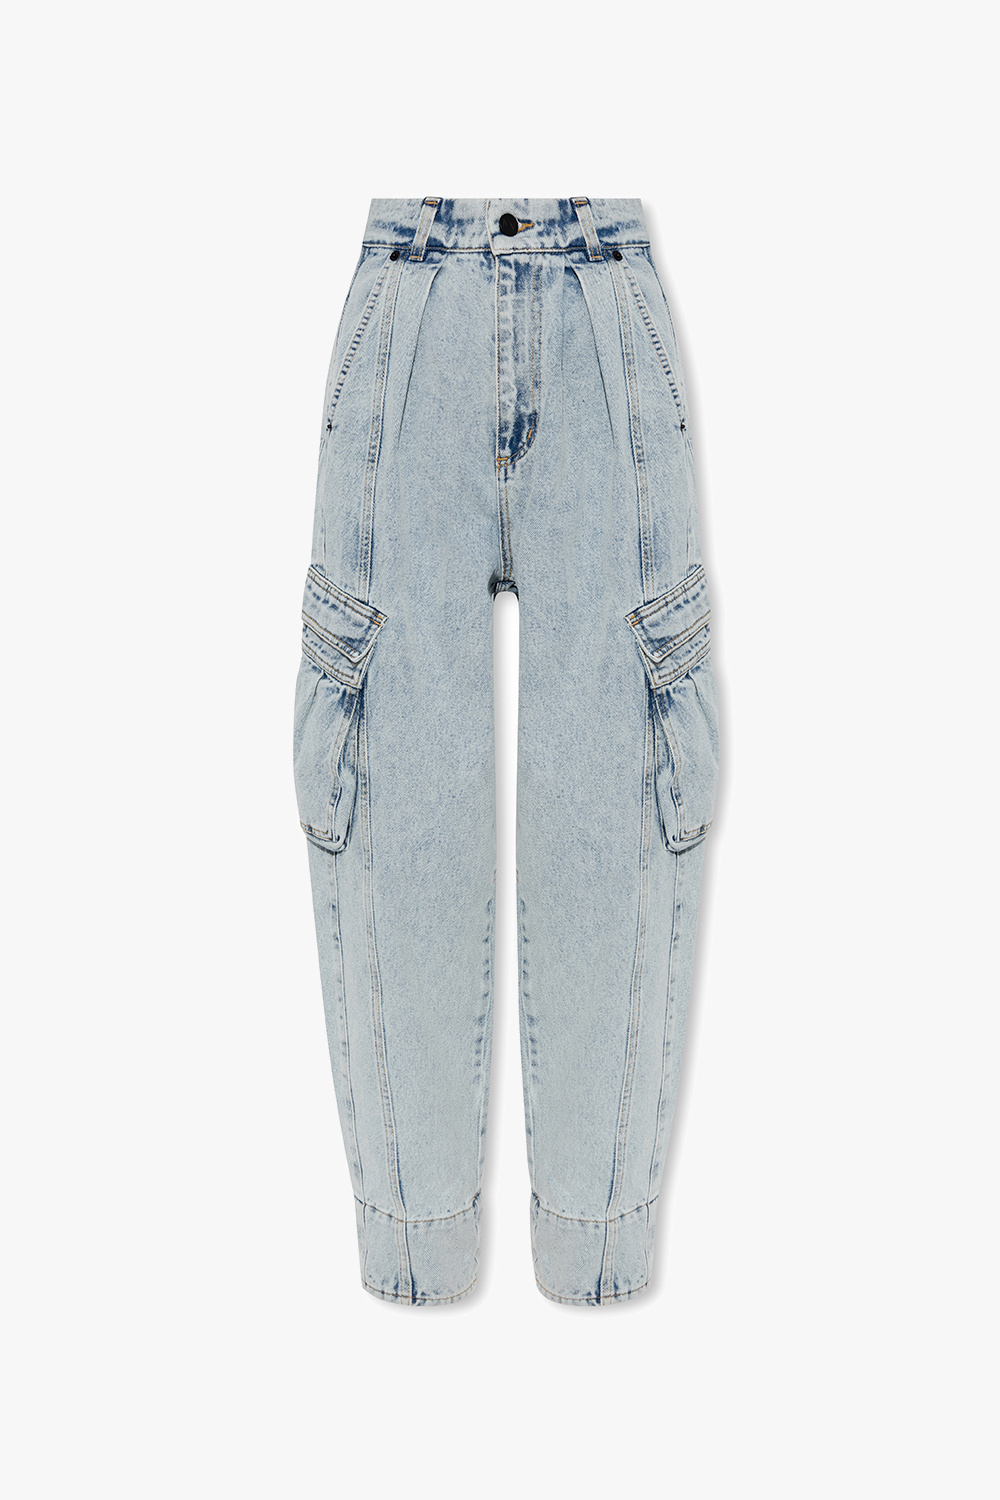 The Mannei ‘Plana’ jeans